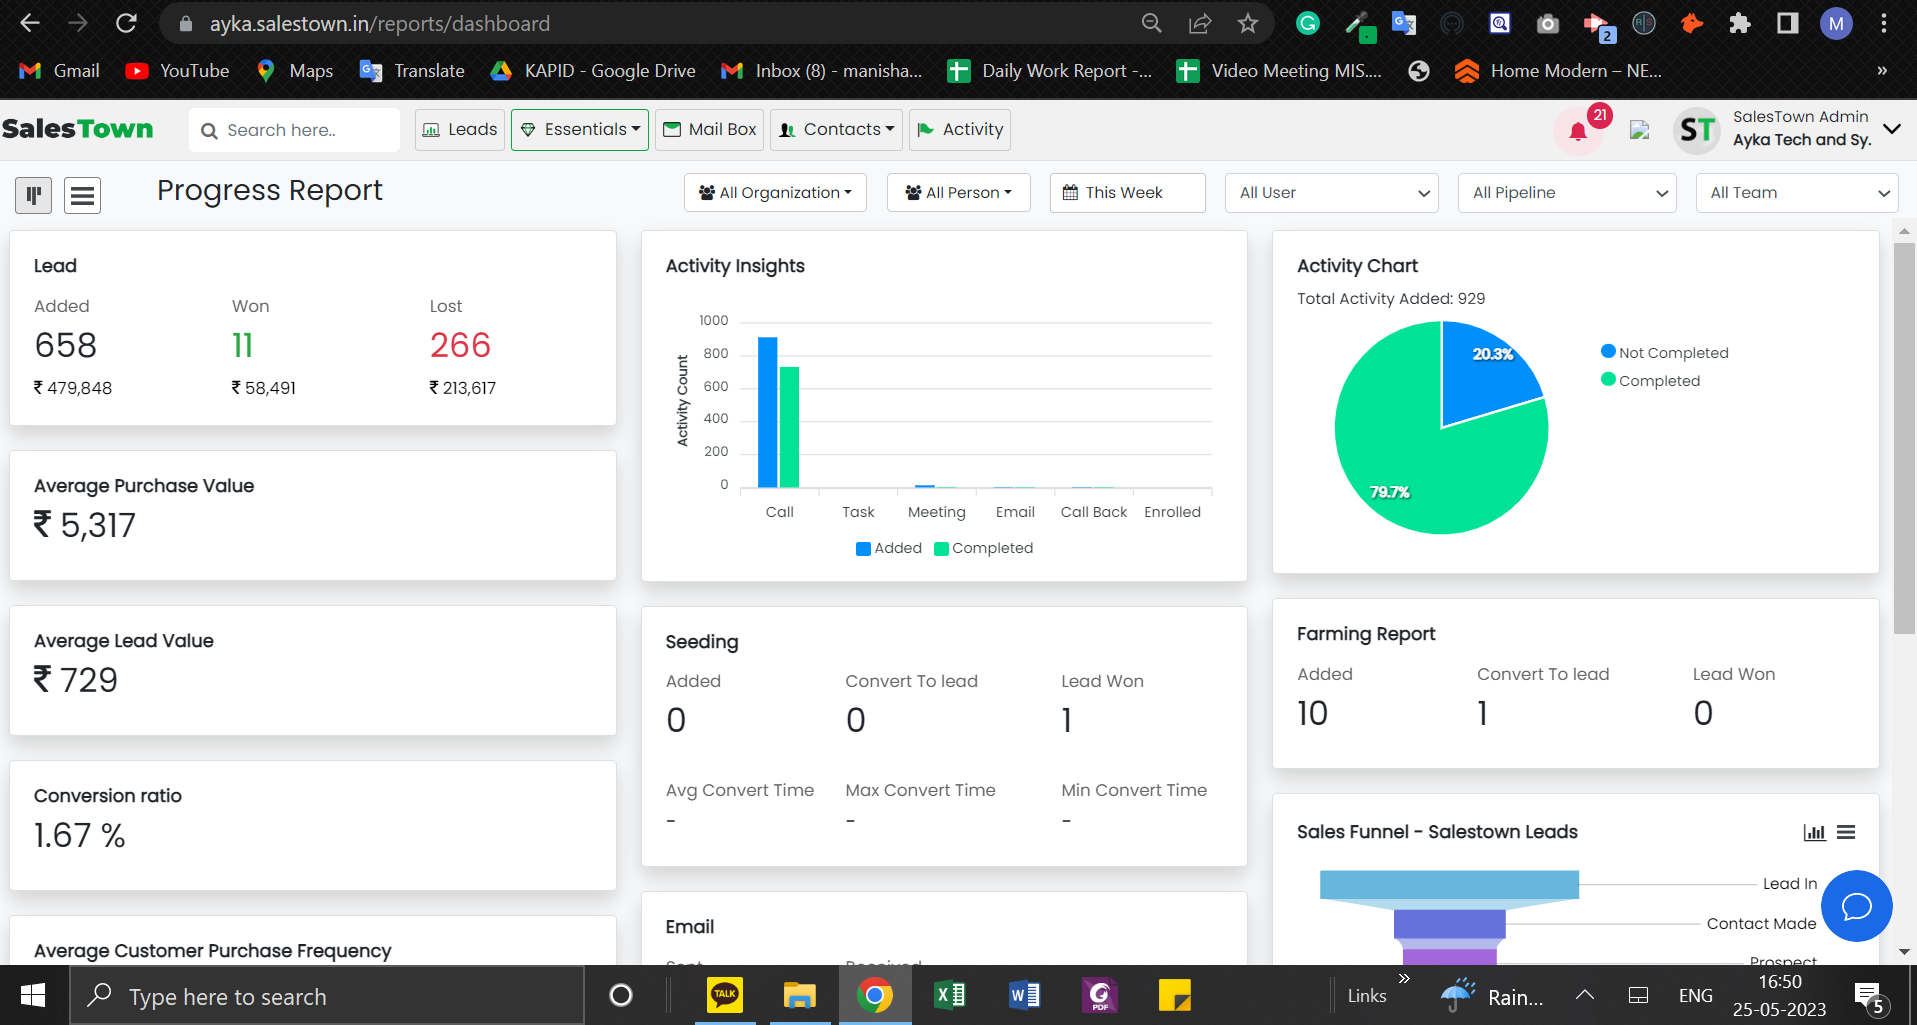 Sales Town dashboard view